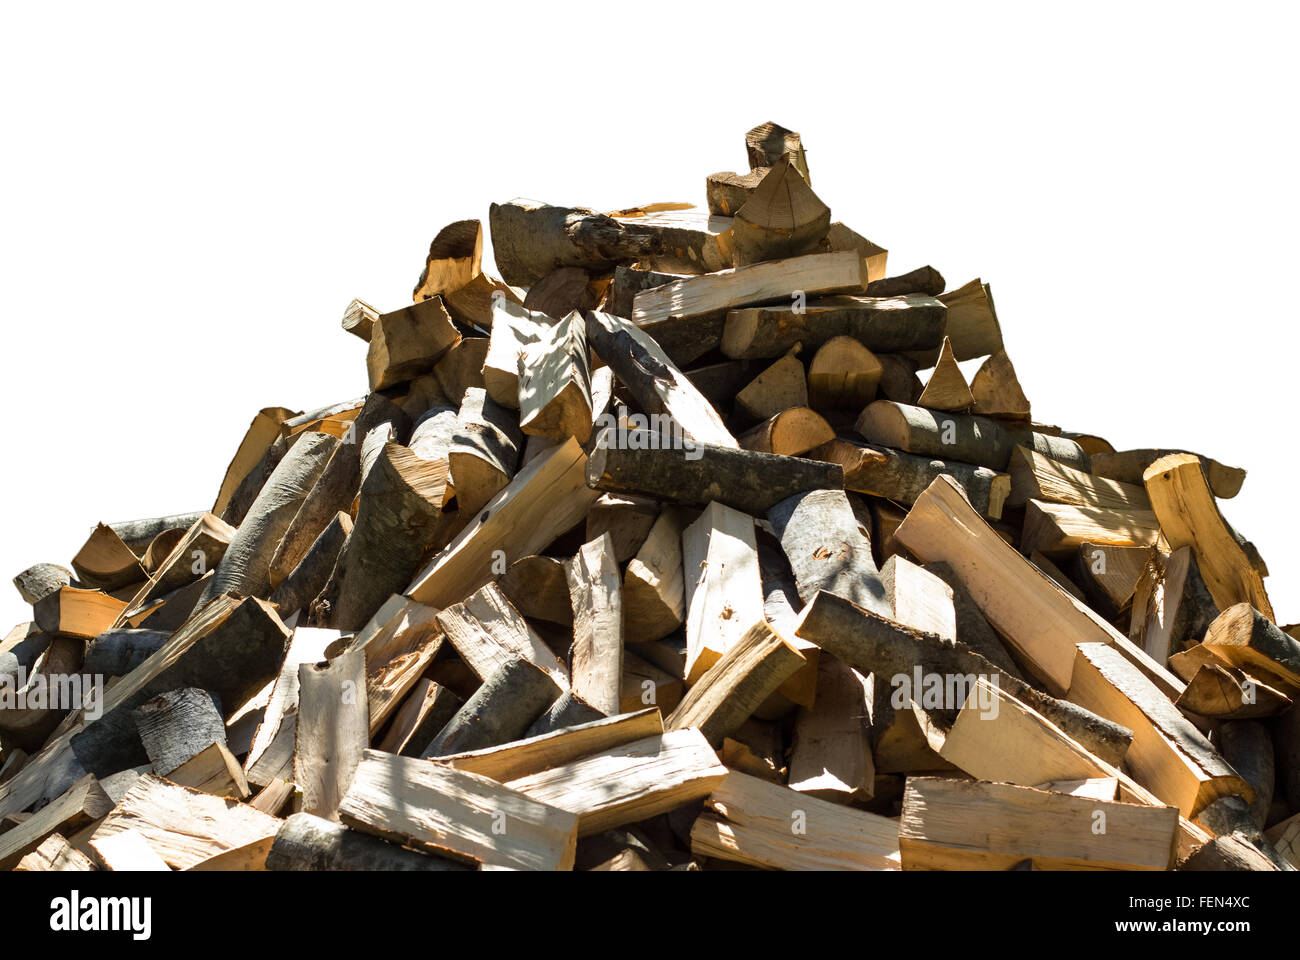 Cutout image of a pile of chopped fire wood Stock Photo